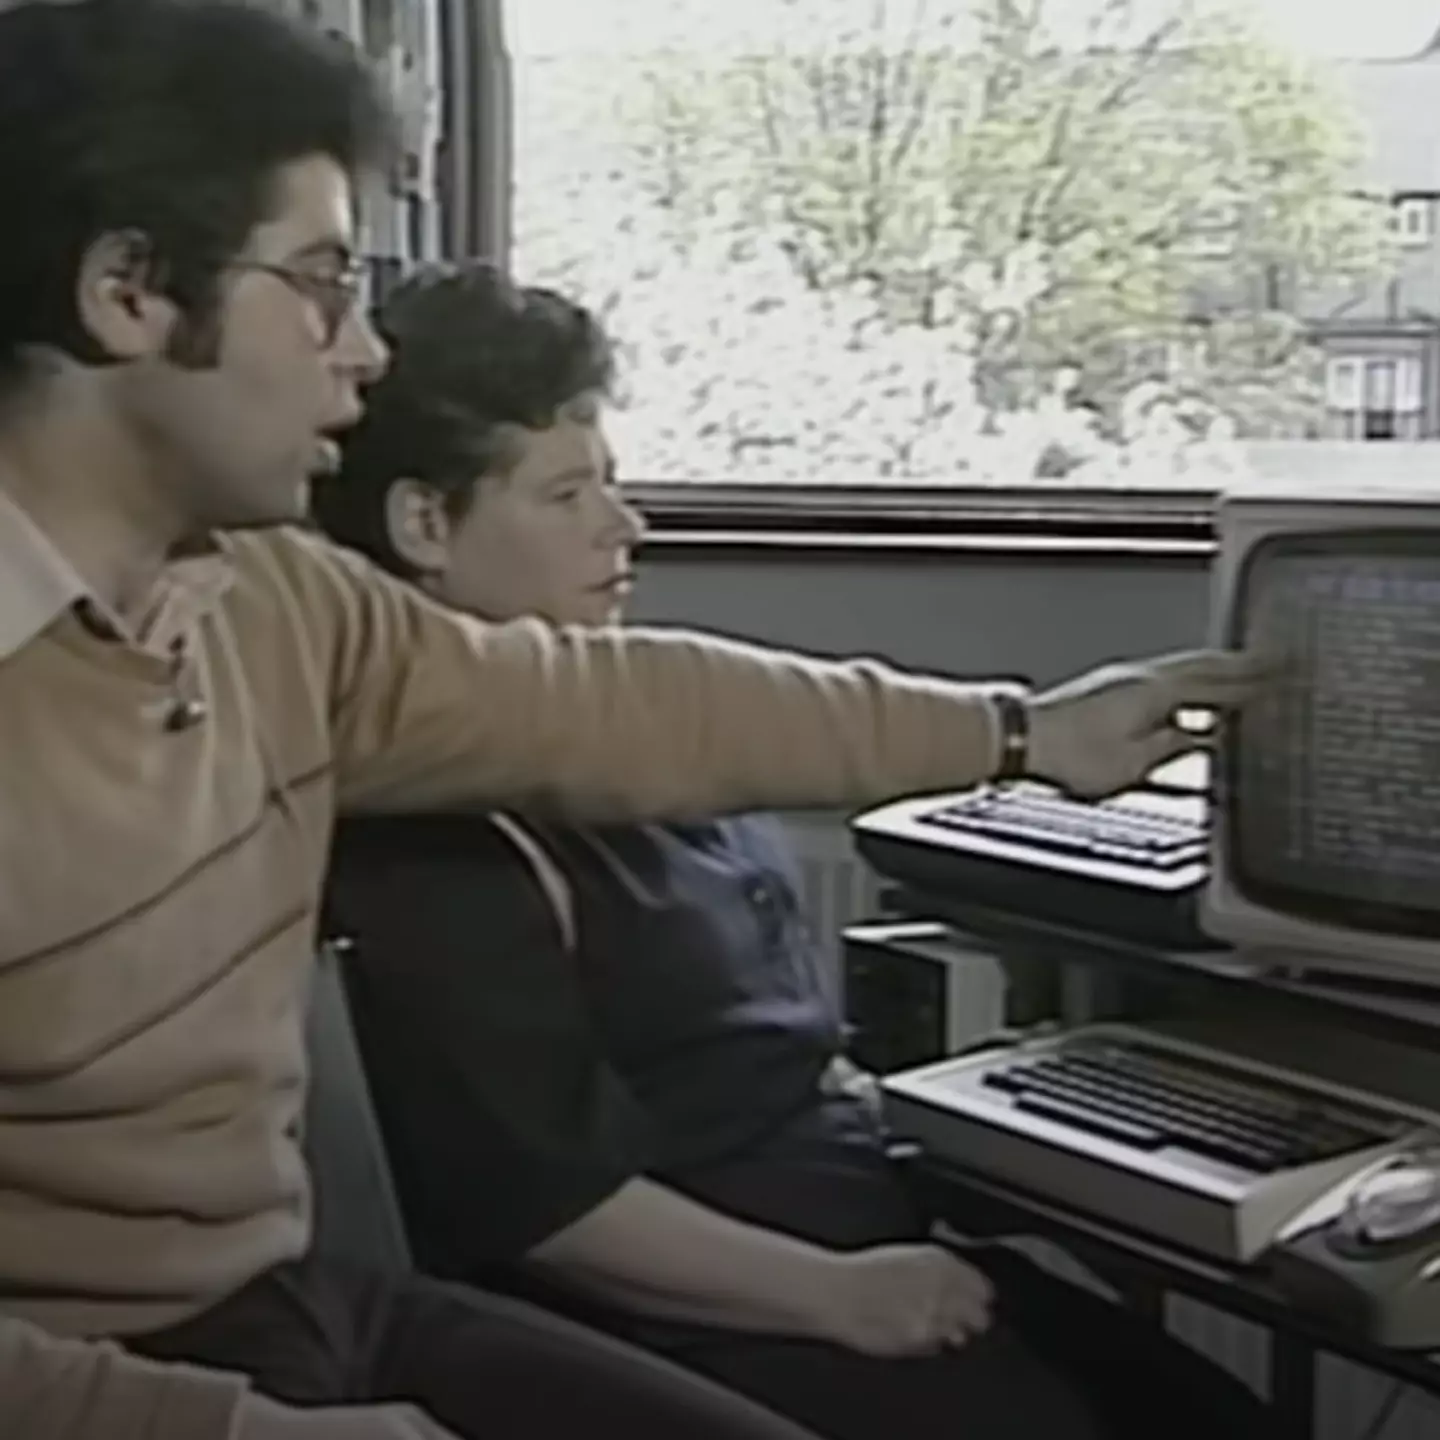 Video from 1984 explaining how to send an email leaves people with the same question 40 years on